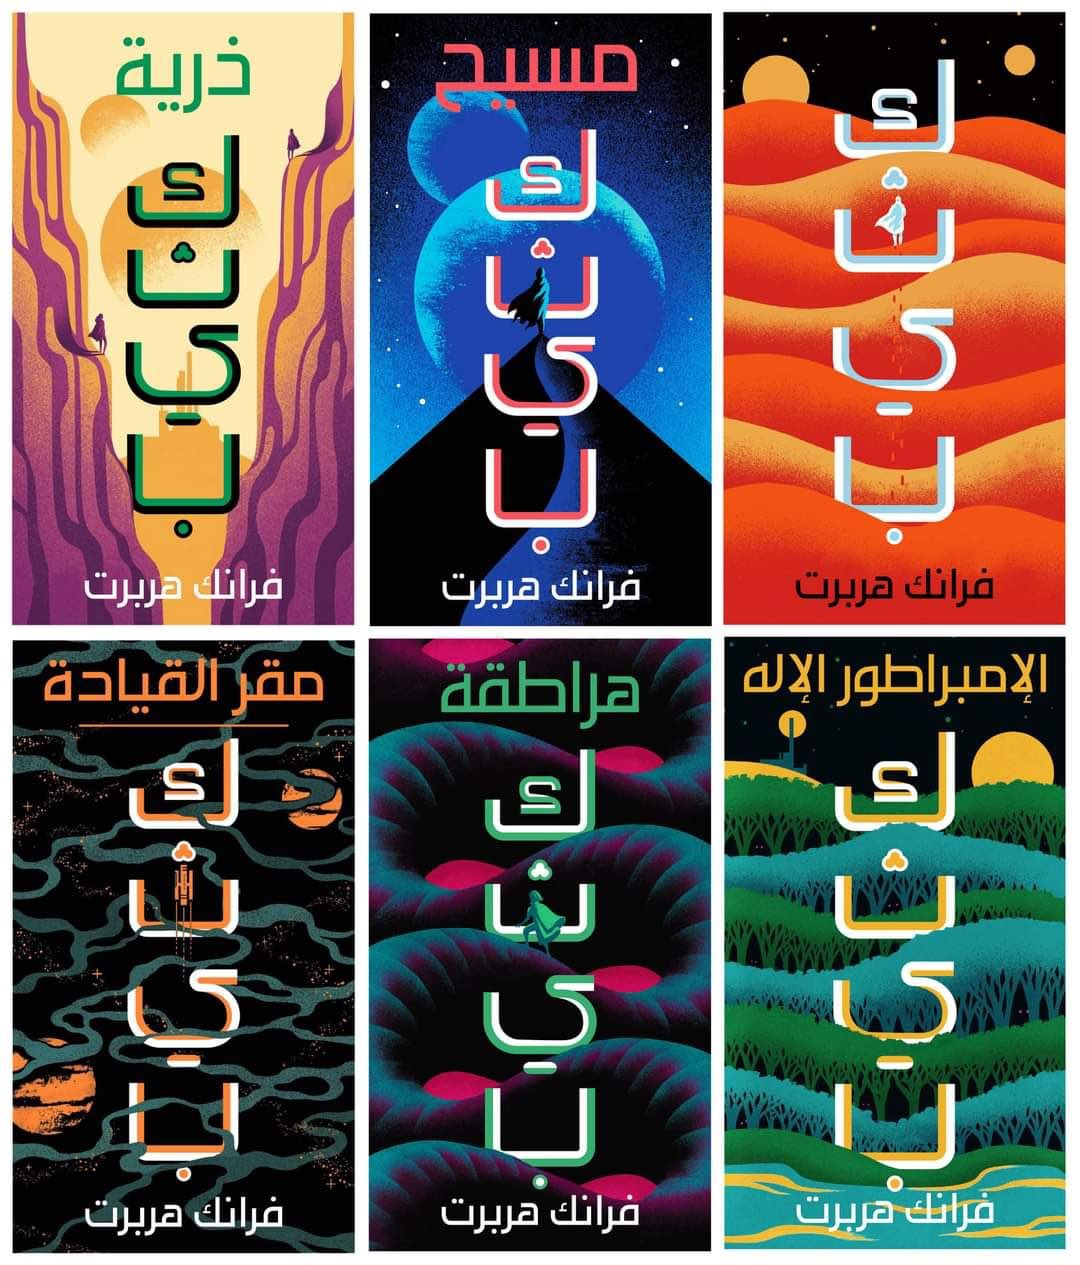 A collage of six book covers with Arabic script and stylised artwork depicting the landscapes of the Dune series.